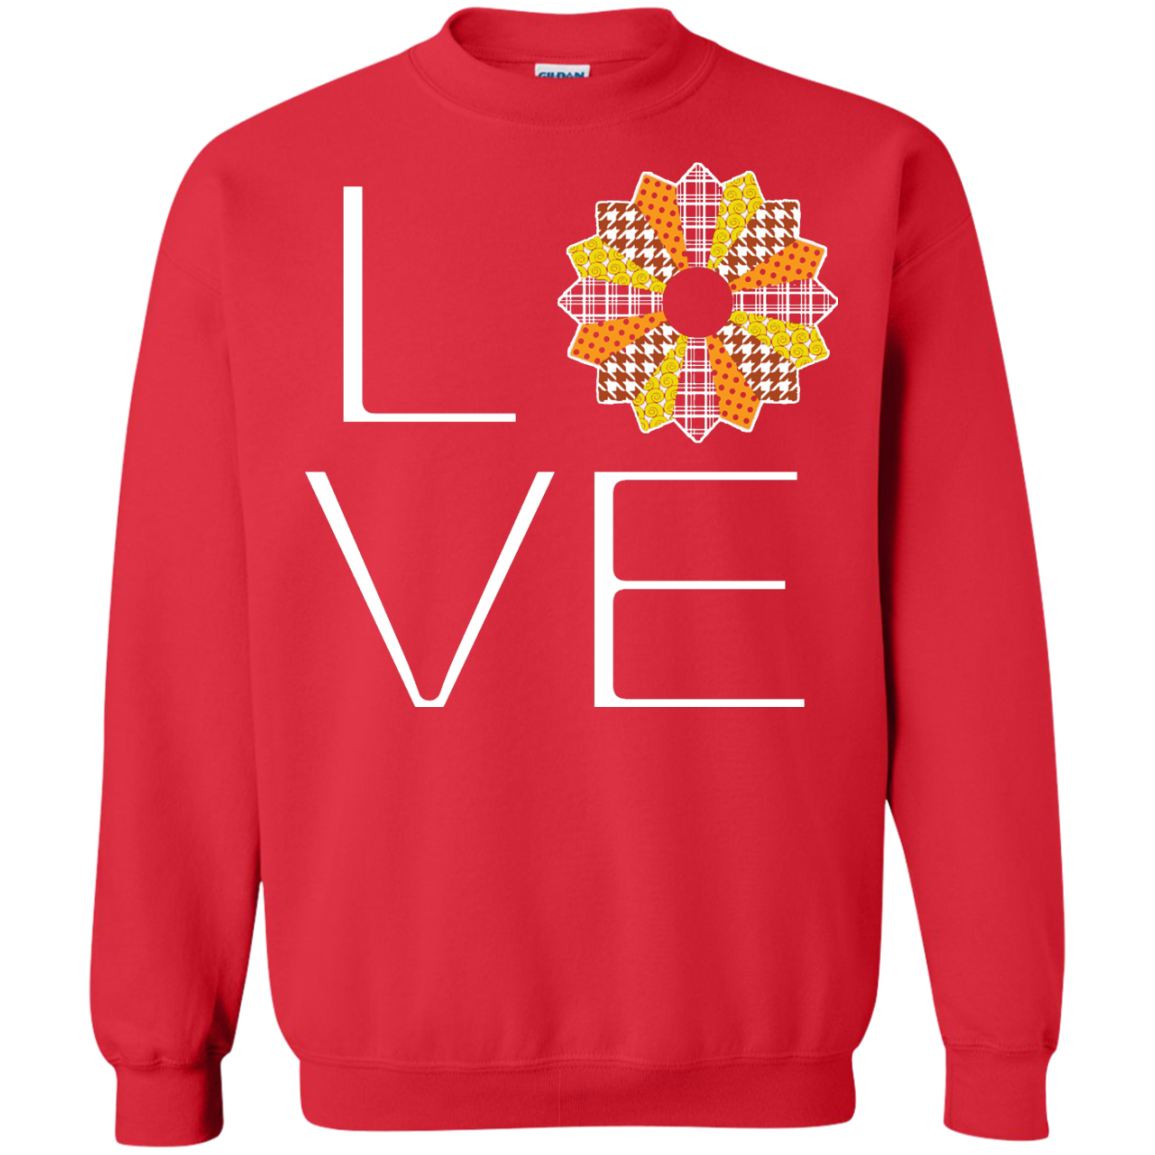 LOVE Quilting (Fall Colors) Crewneck Sweatshirts - Crafter4Life - 5